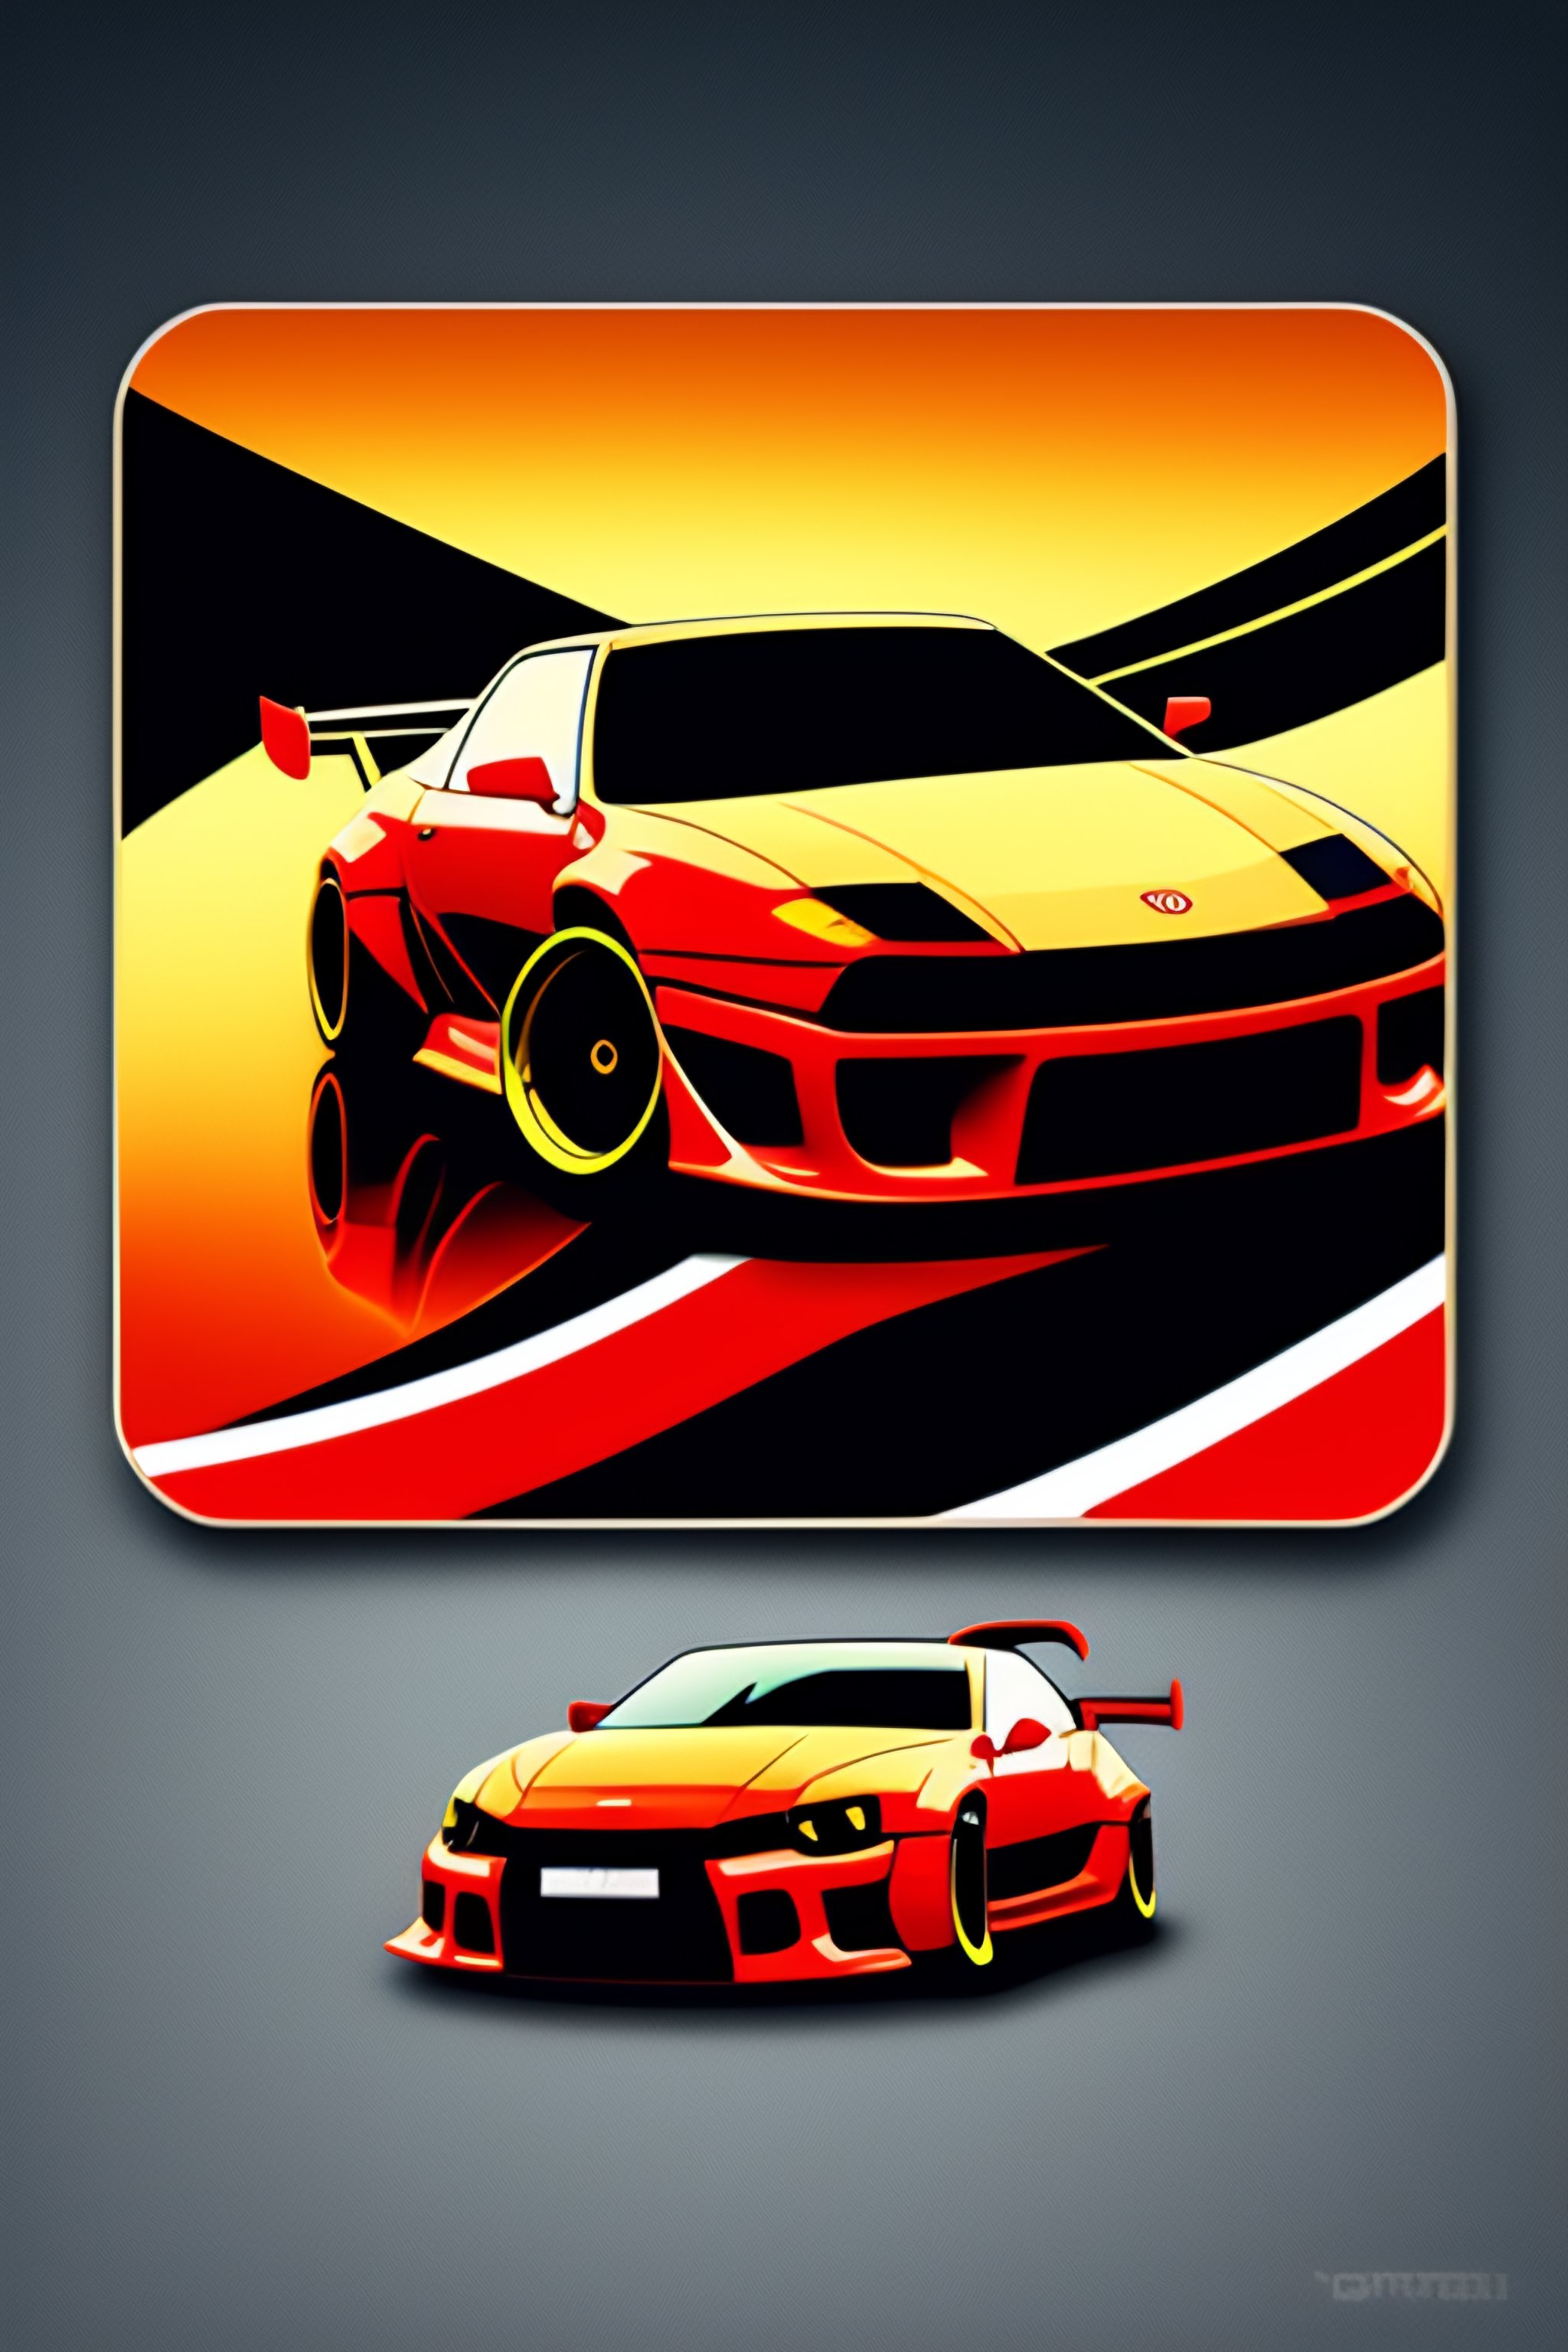 Lexica - Cartoon JDM car , sticker, initial d anime style, solid background  color